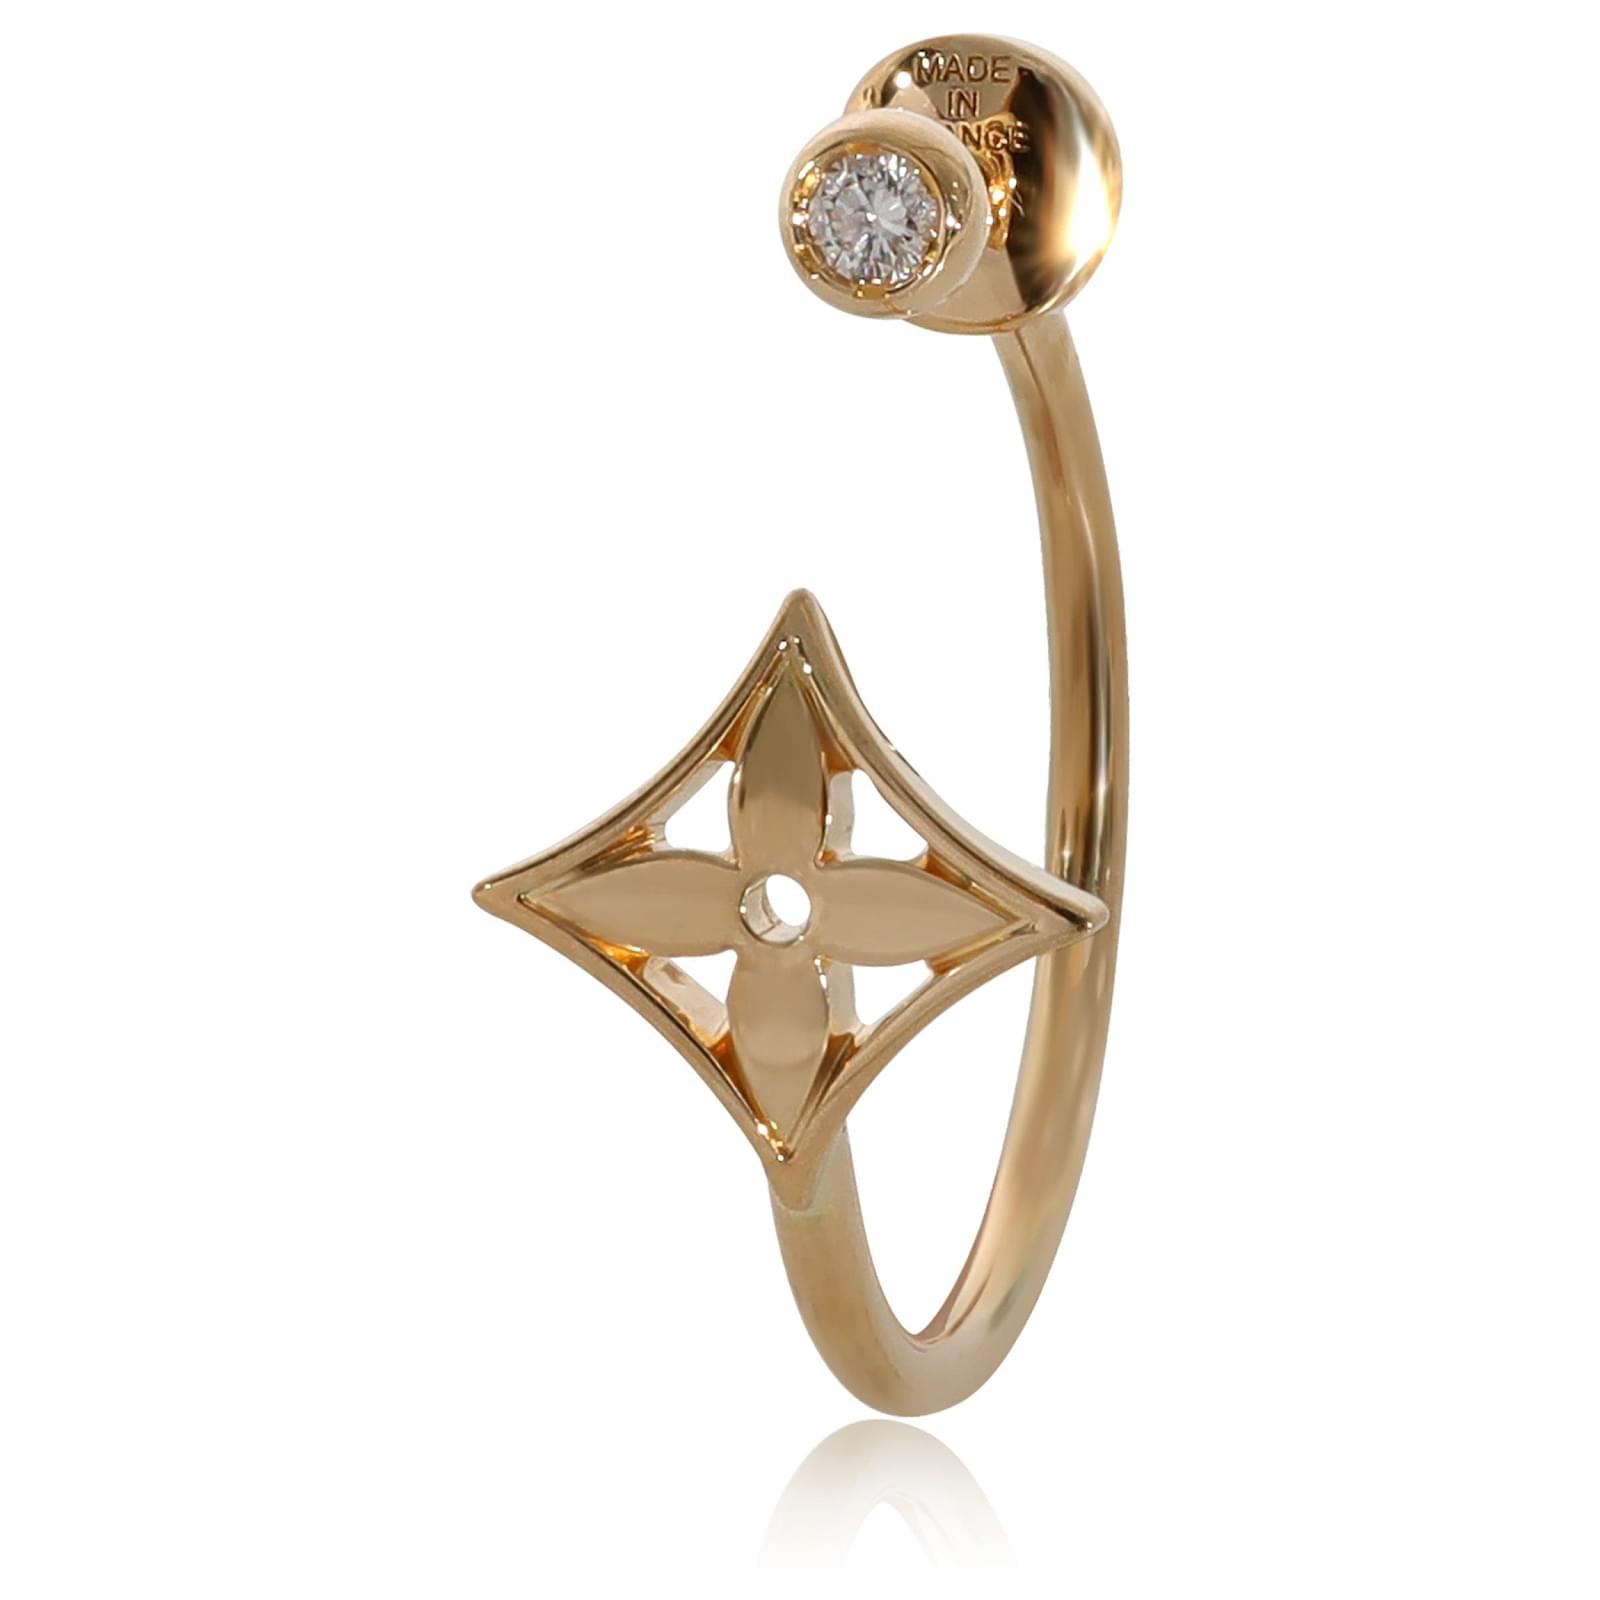 Shop Louis Vuitton Idylle blossom lv ear stud, white gold and